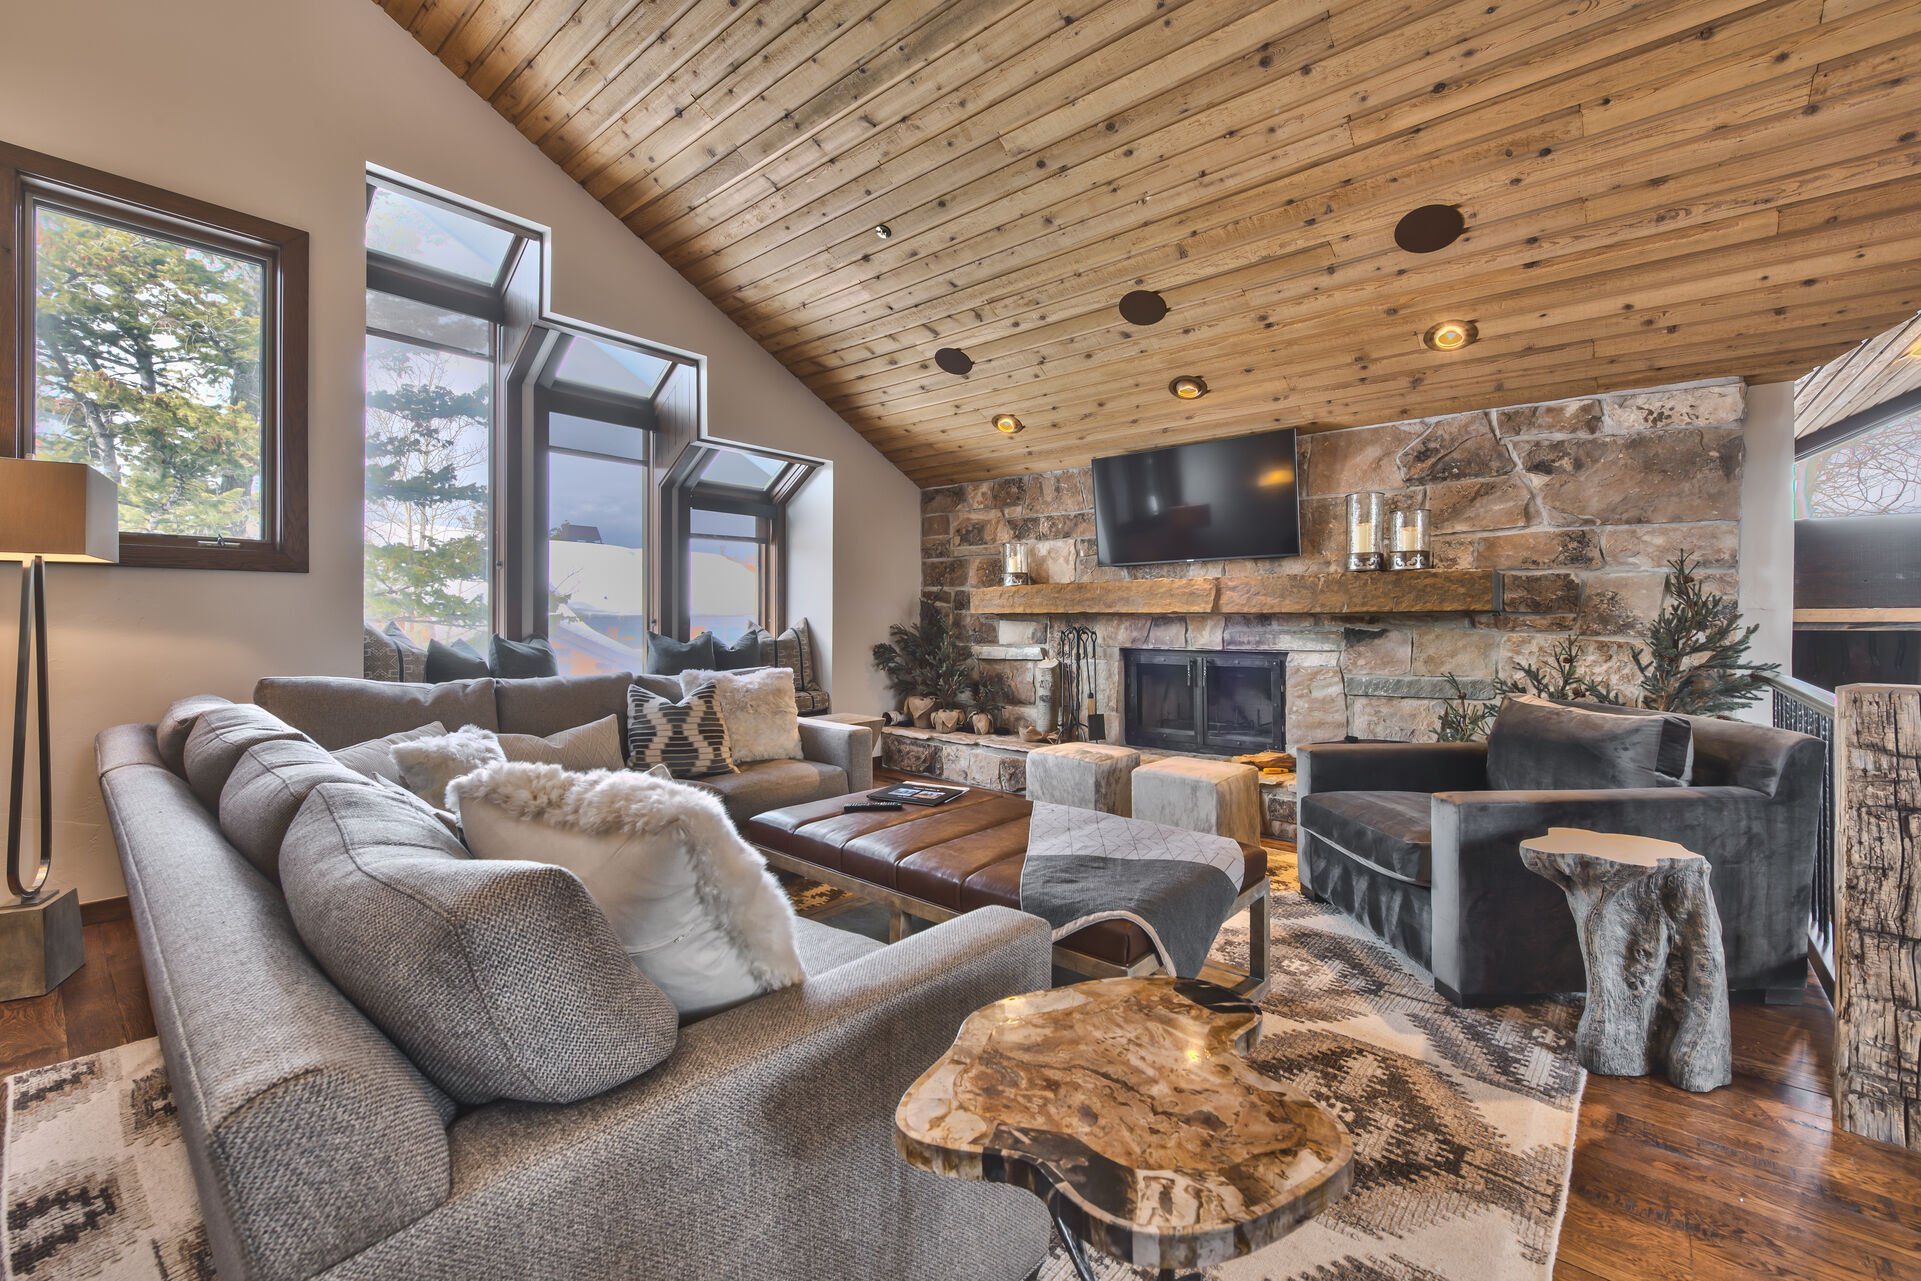 View our vacation rentals in Deer Valley